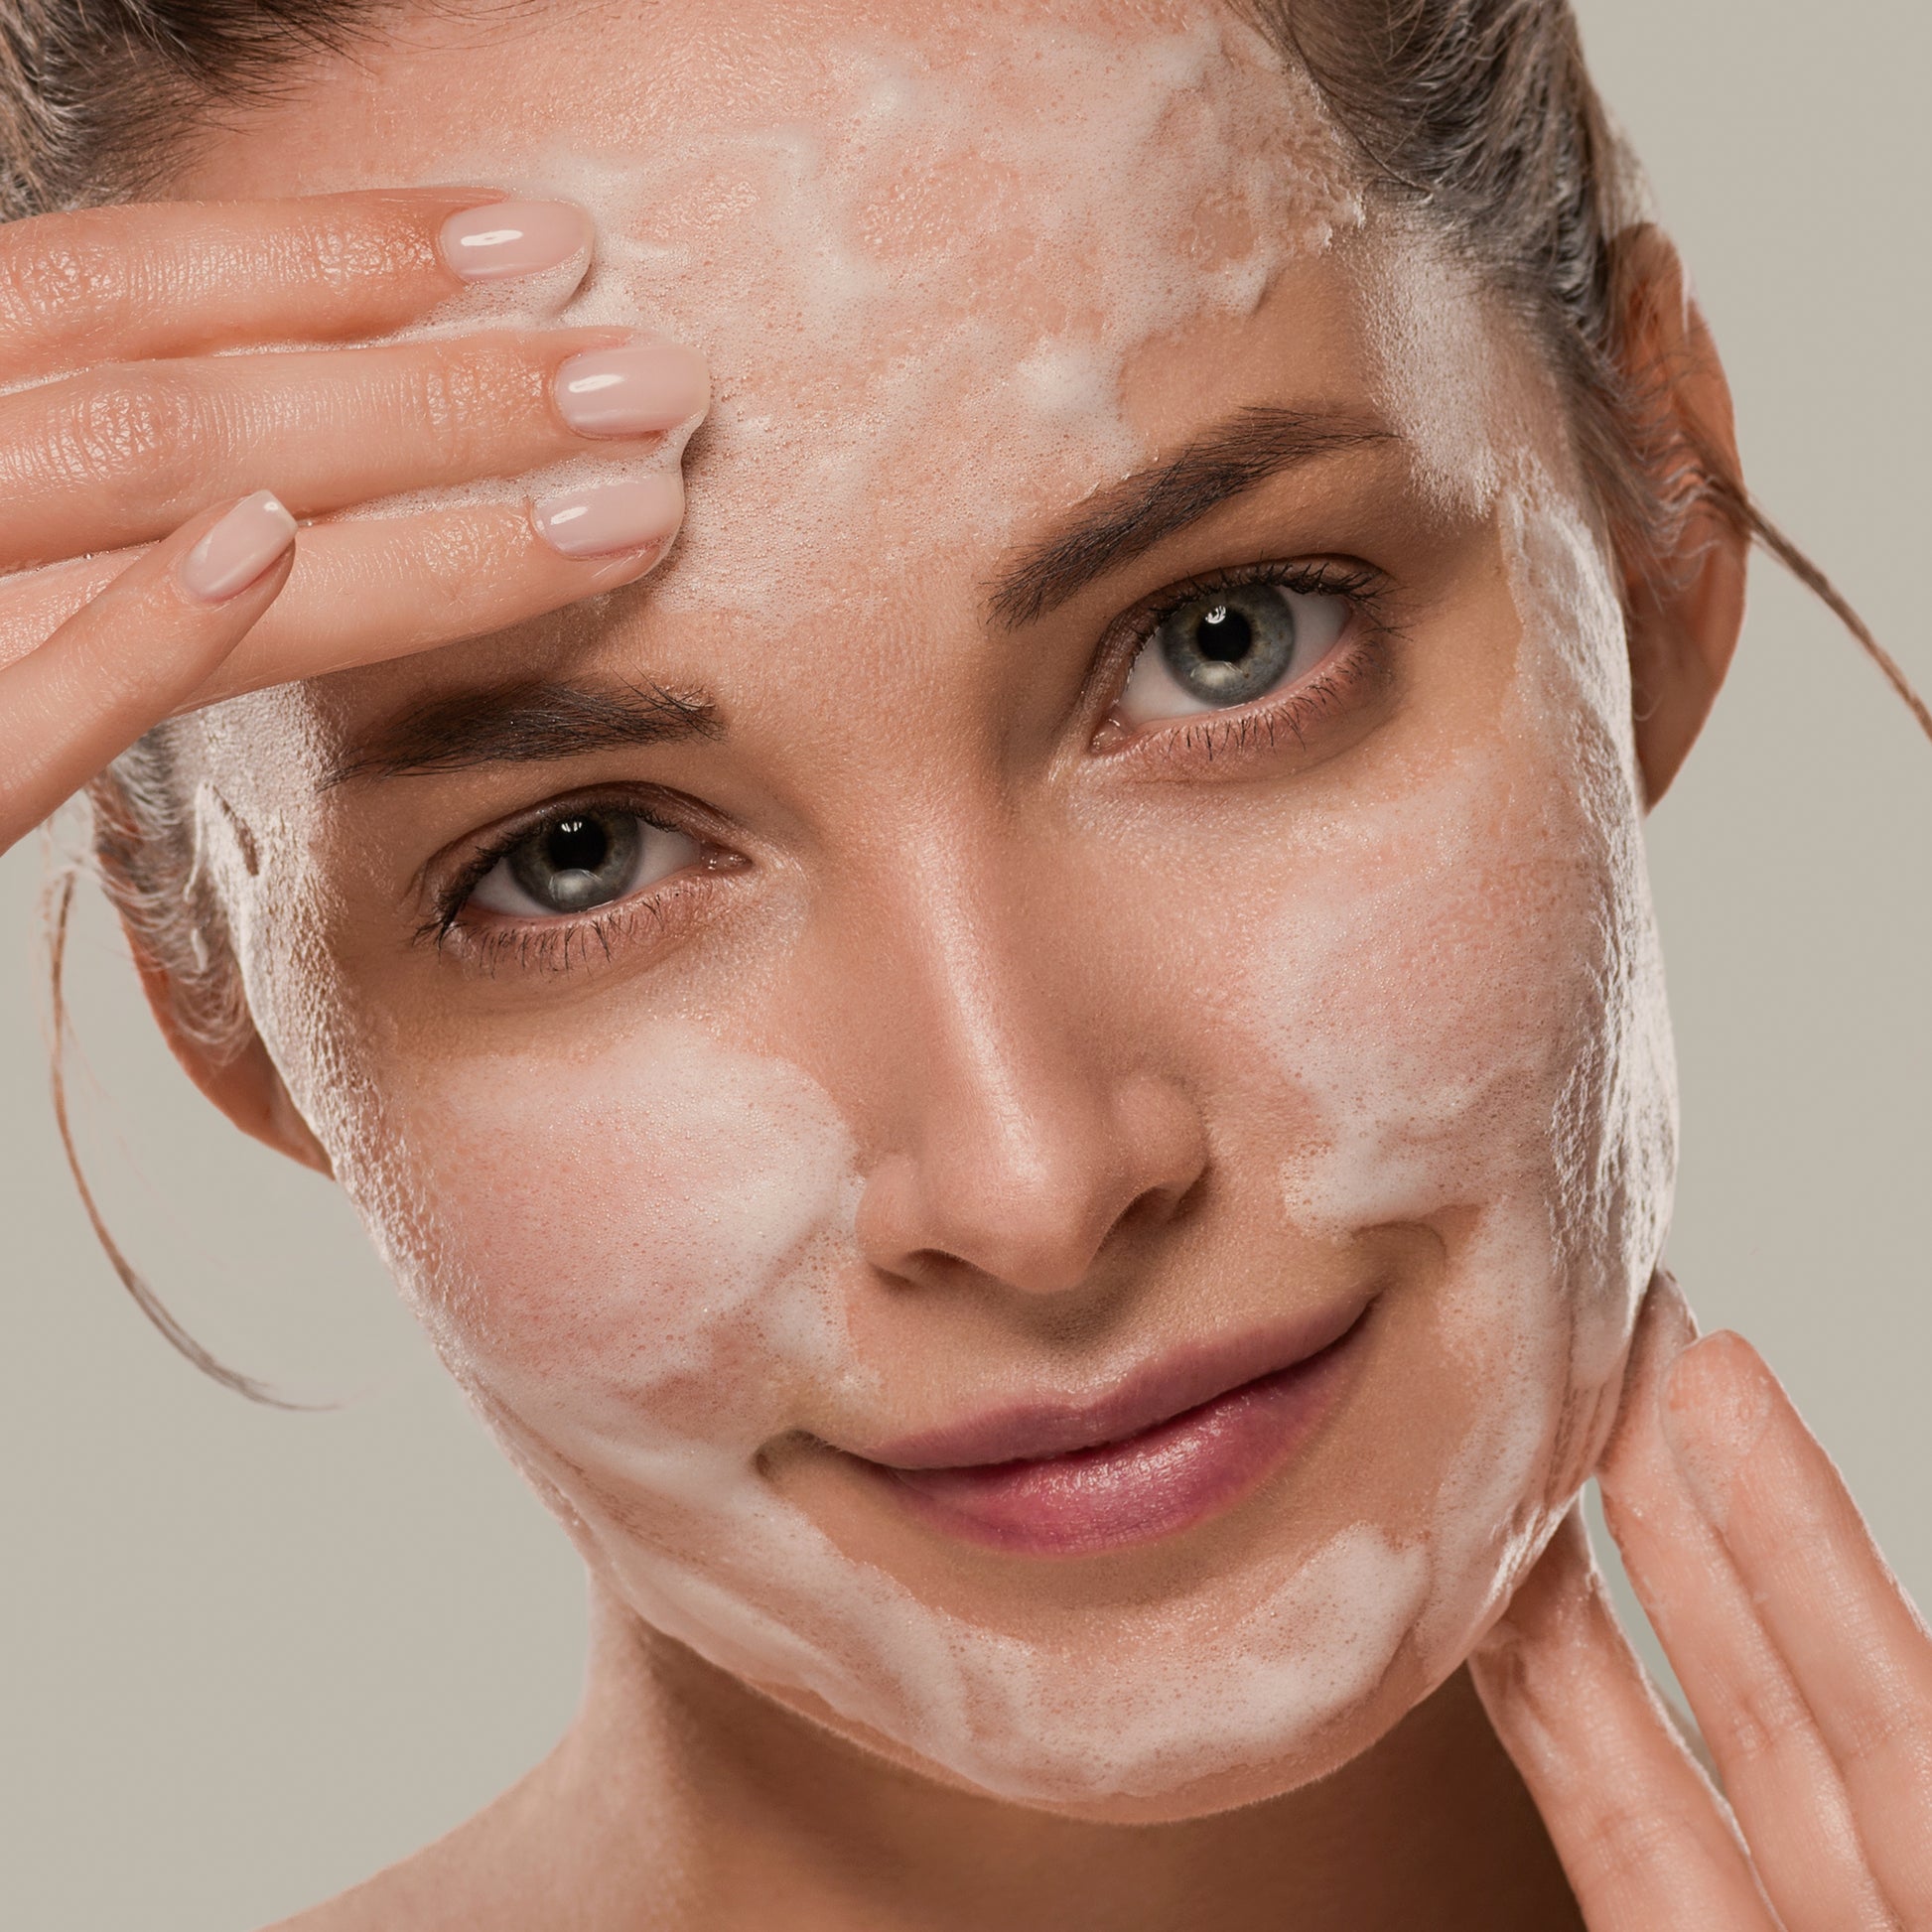 Women cleansing face with gentle, natural facewash good for sensitive, dry skin.